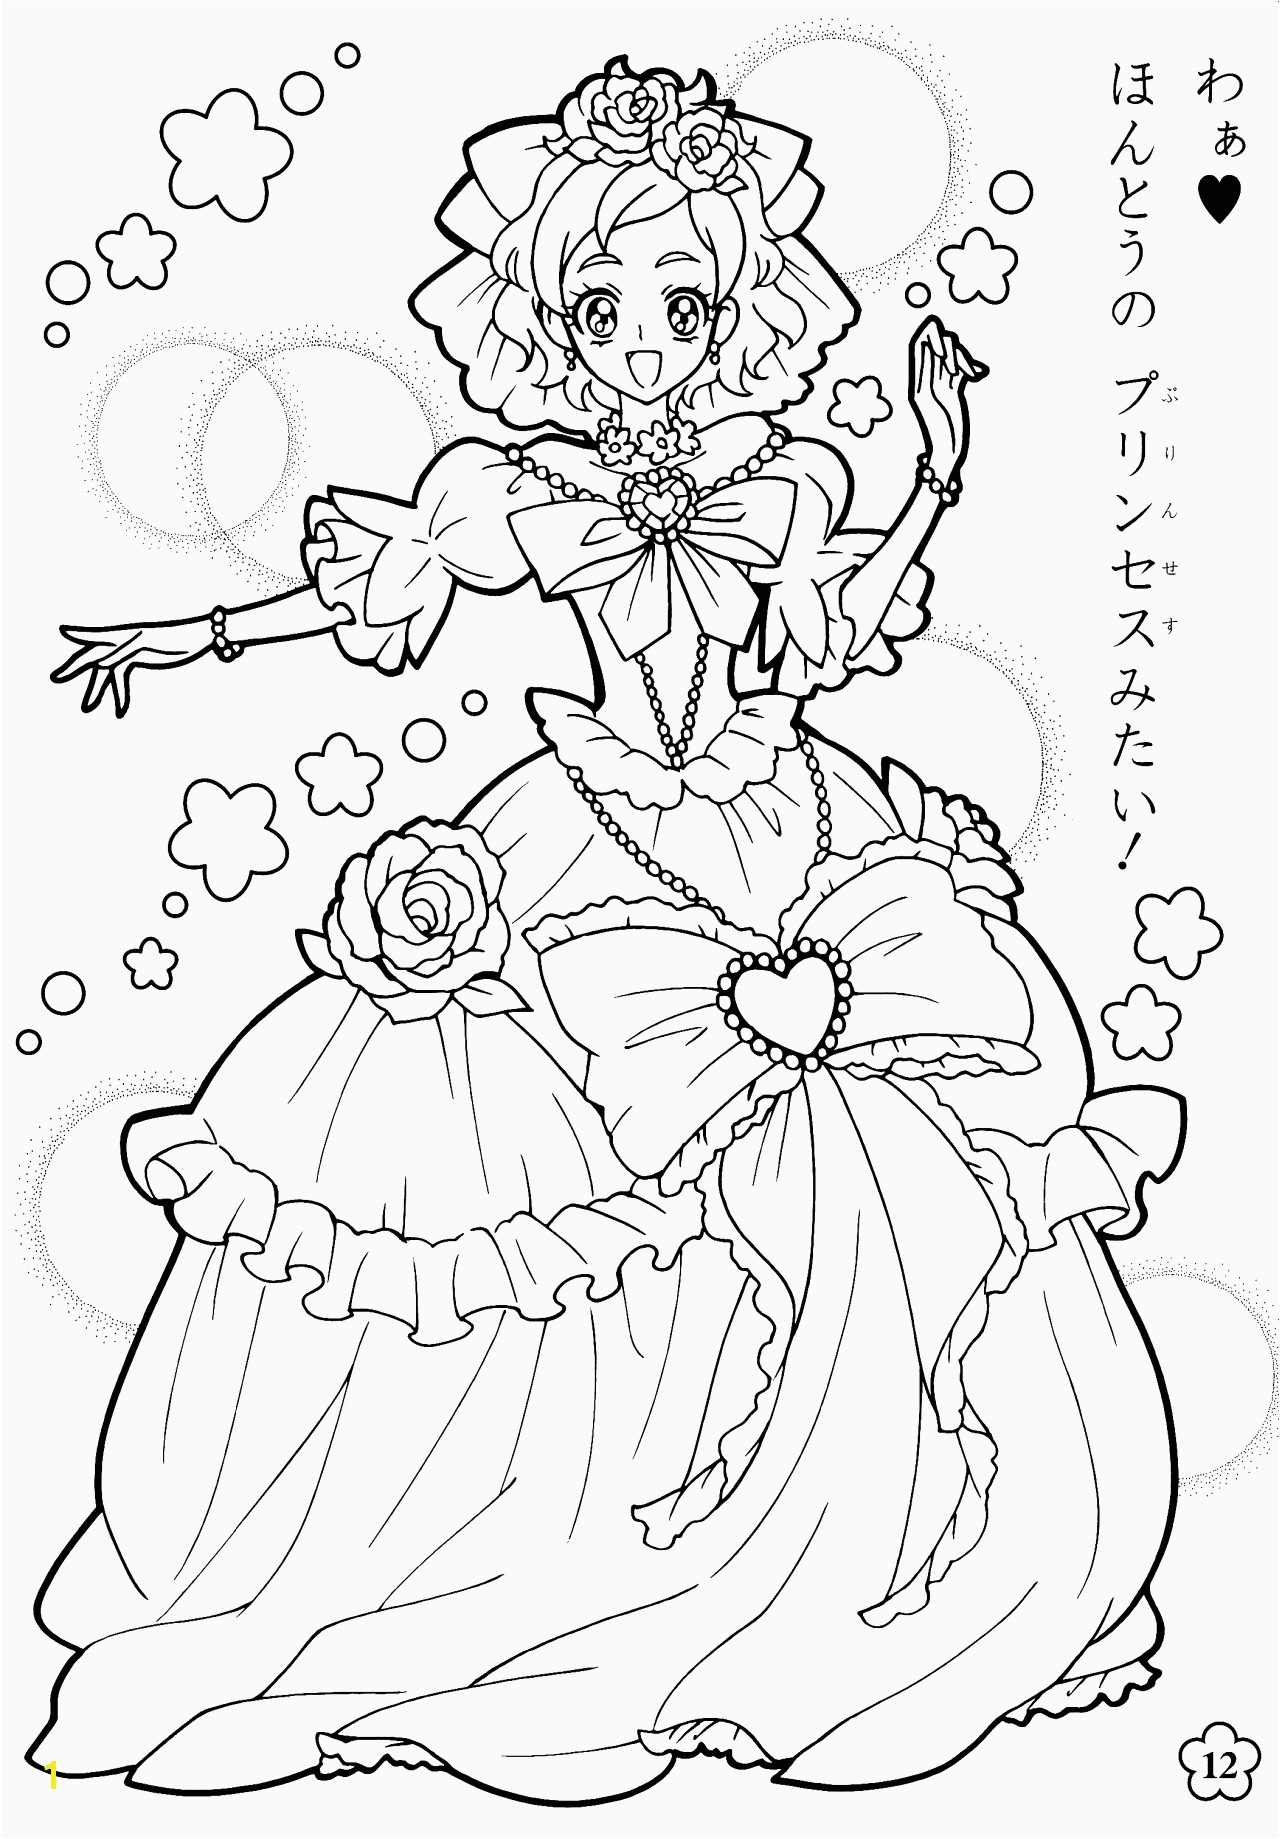 Cool Coloring Page Unique Witch Coloring Pages New Crayola Pages 0d Cool Coloring Page Unique